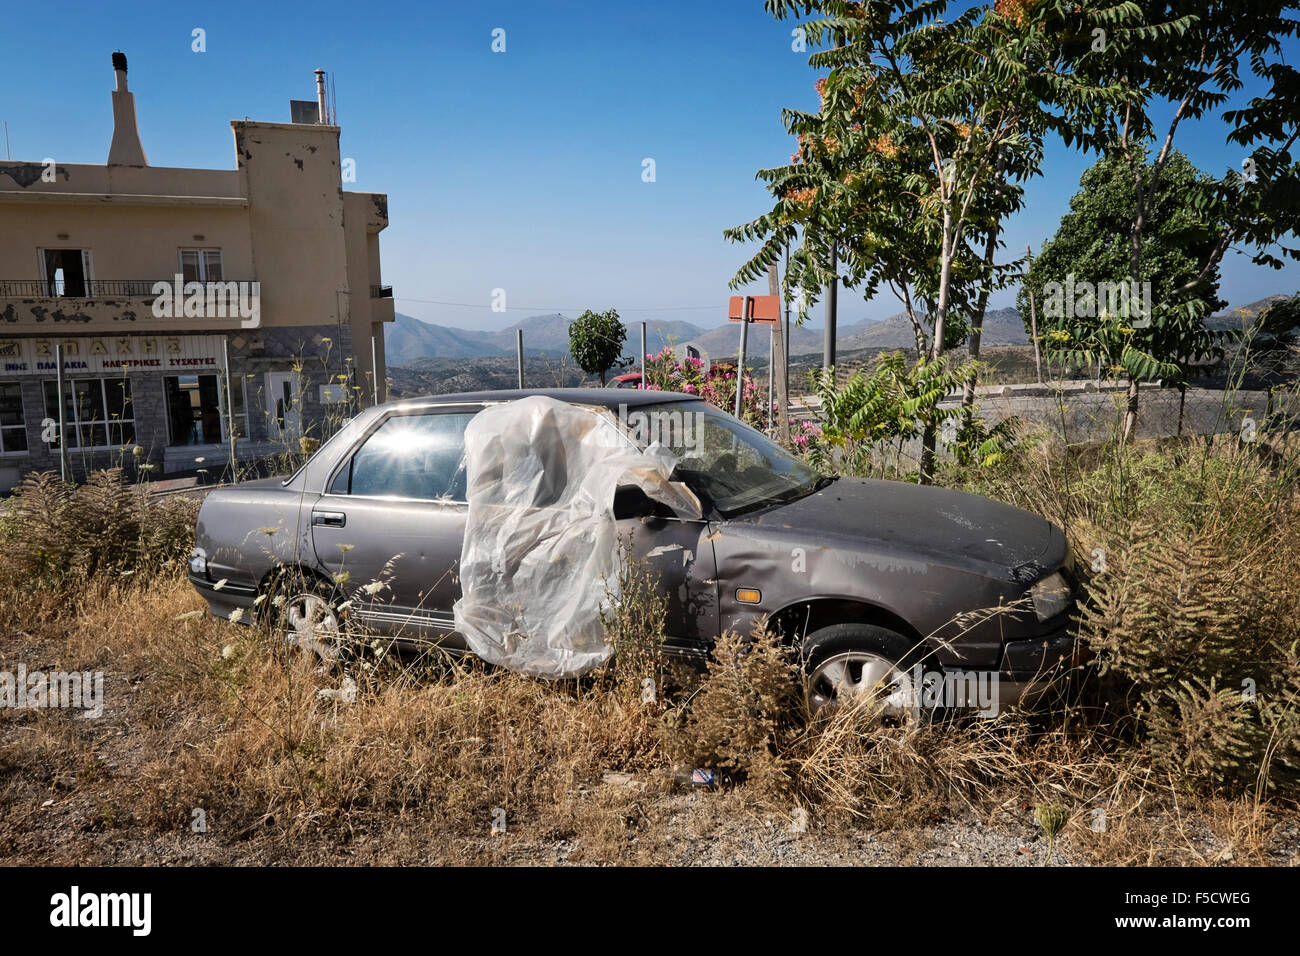 An abandoned car on a vacant lot in the village of Anogia on the island of Crete in Greece Stock Photo